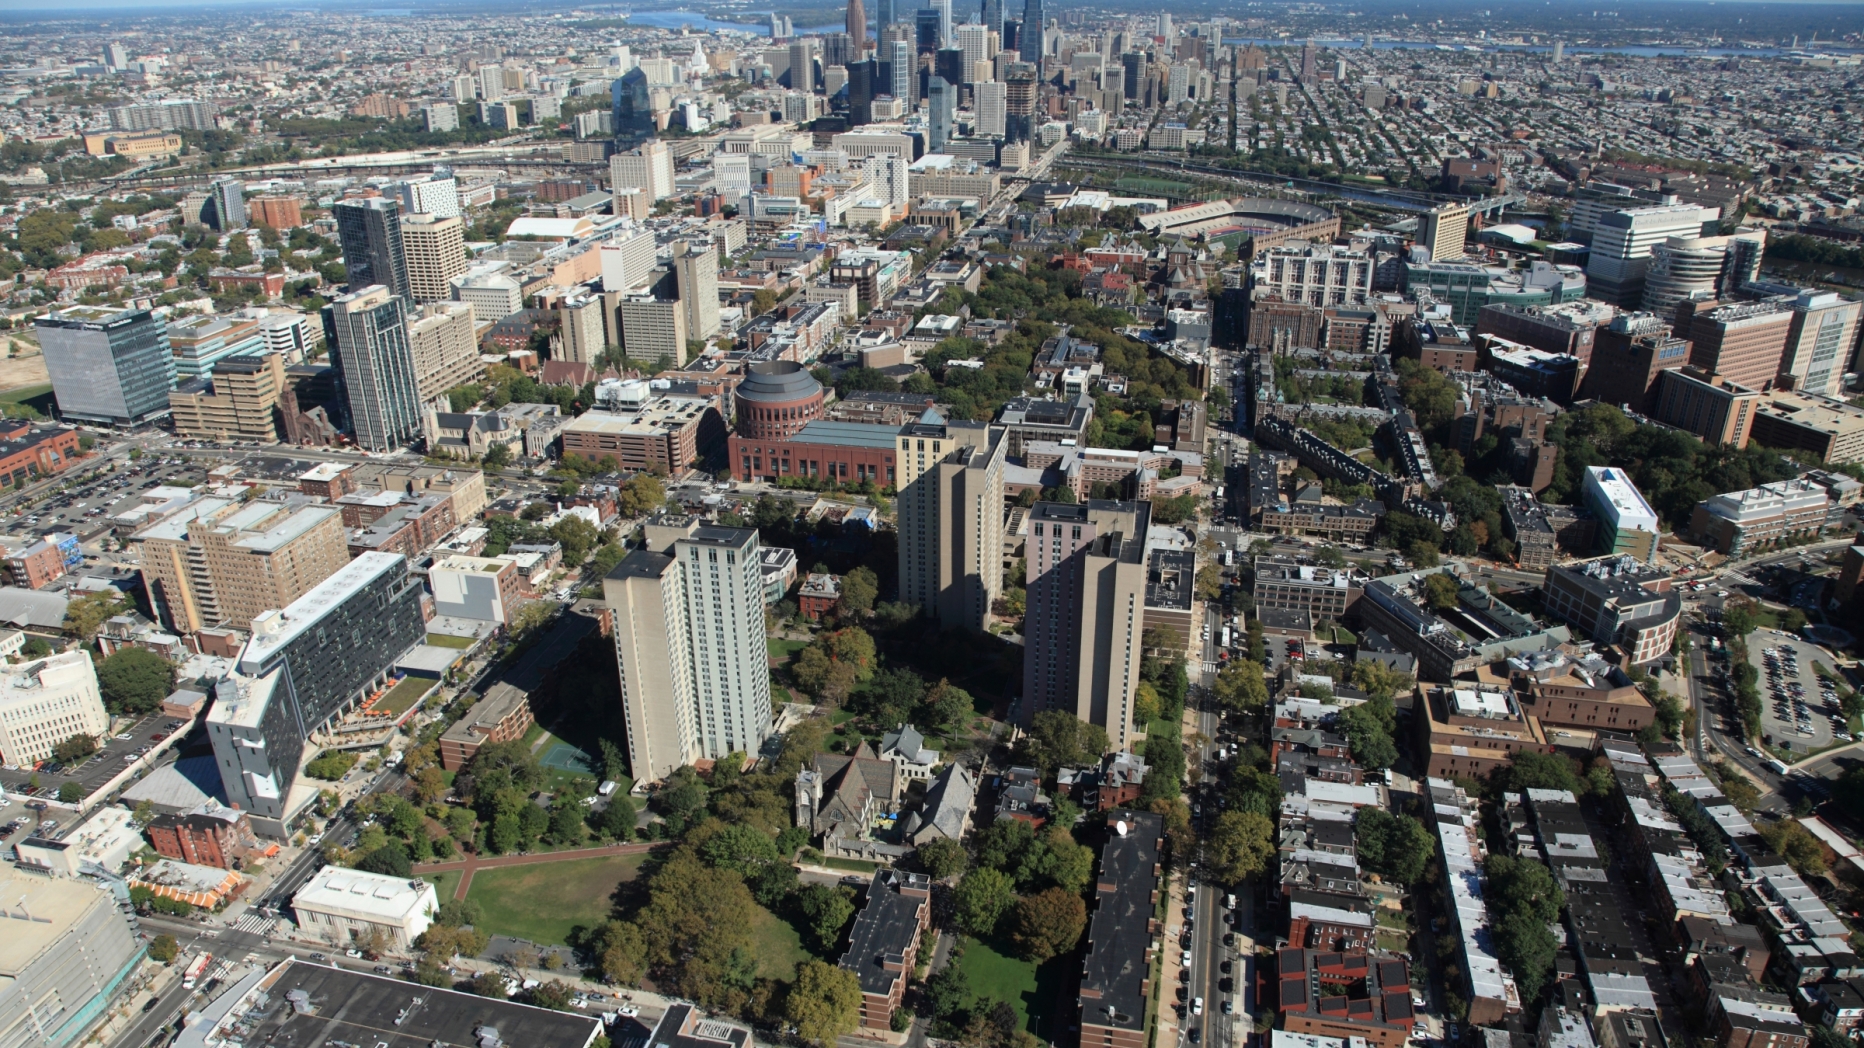 Aerial view of UPenn campus with Philadelphia skyline in the background